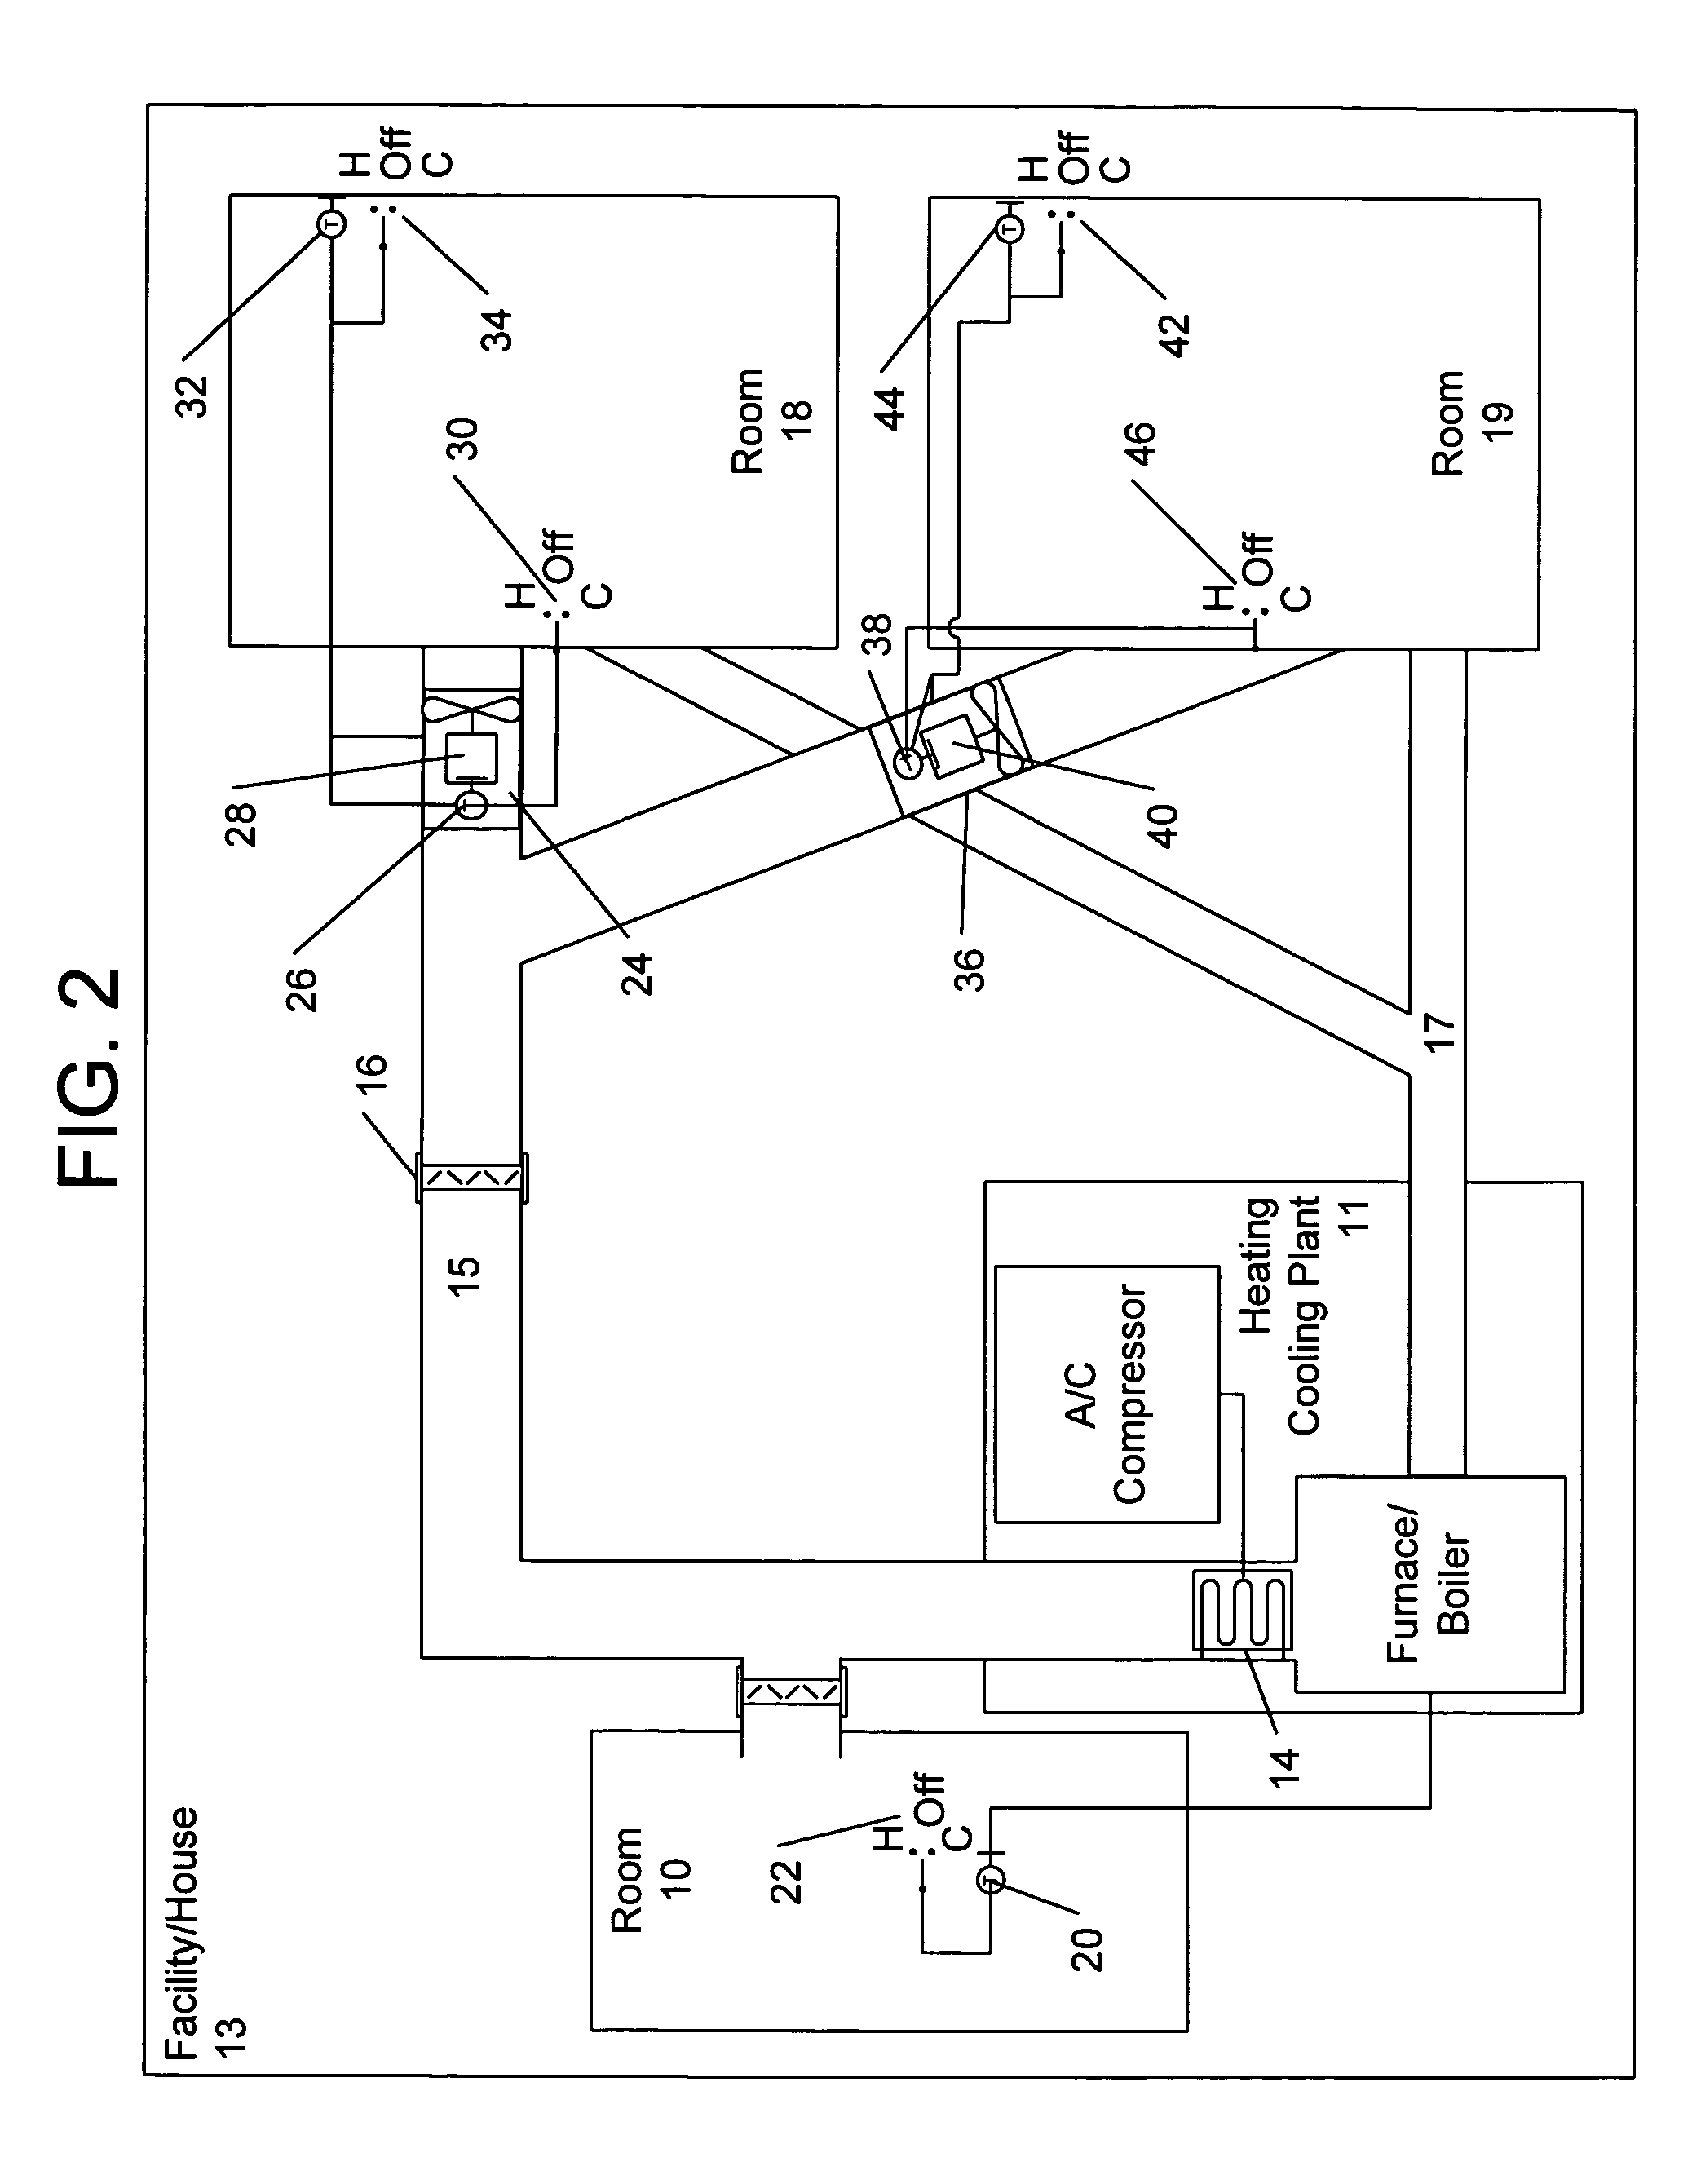 Heating and cooling energy saving device